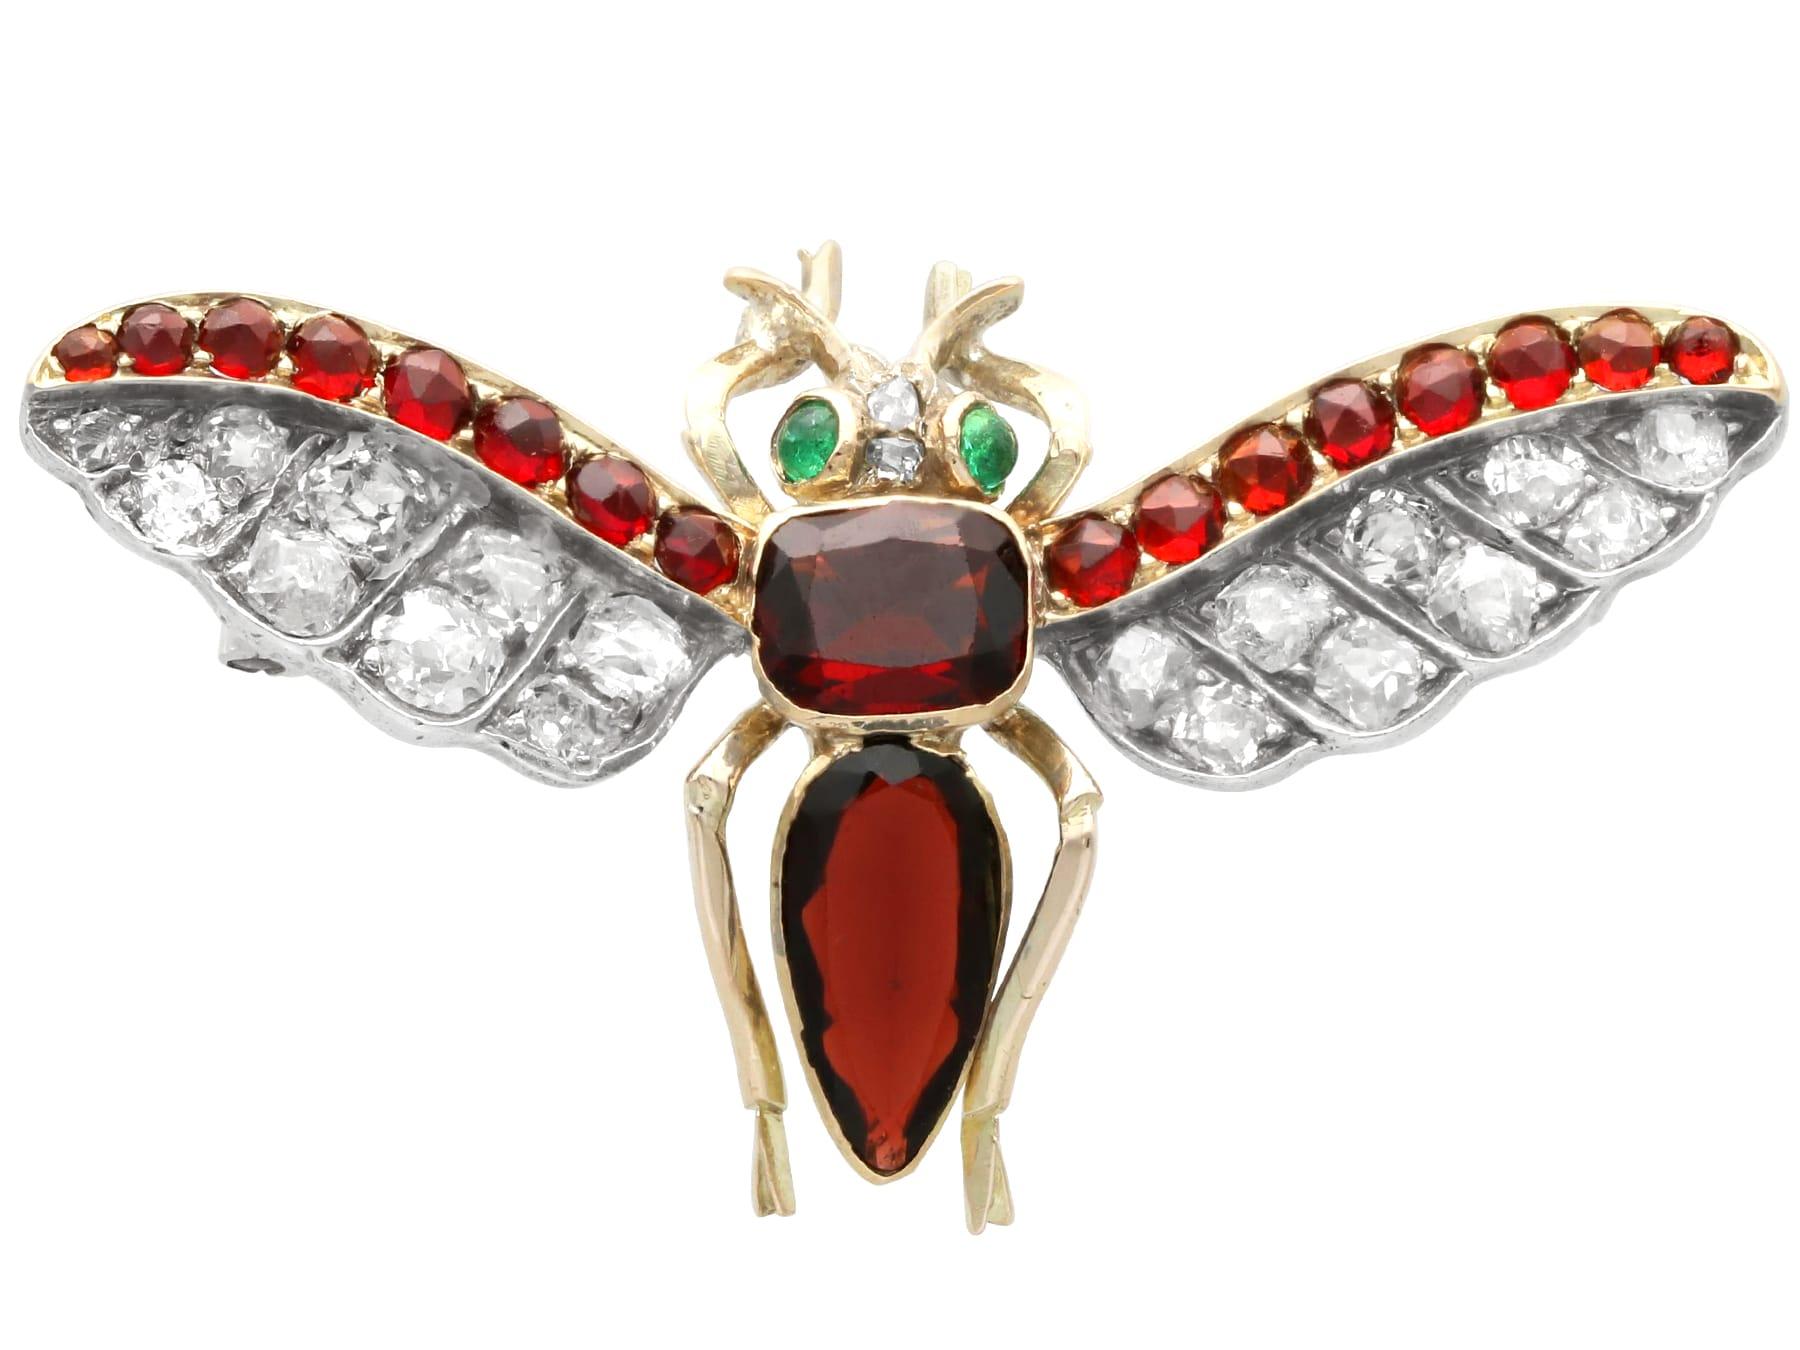 Antique 2.13 Carat Garnet Diamond and Emerald Yellow Gold Insect Pendant For Sale 2